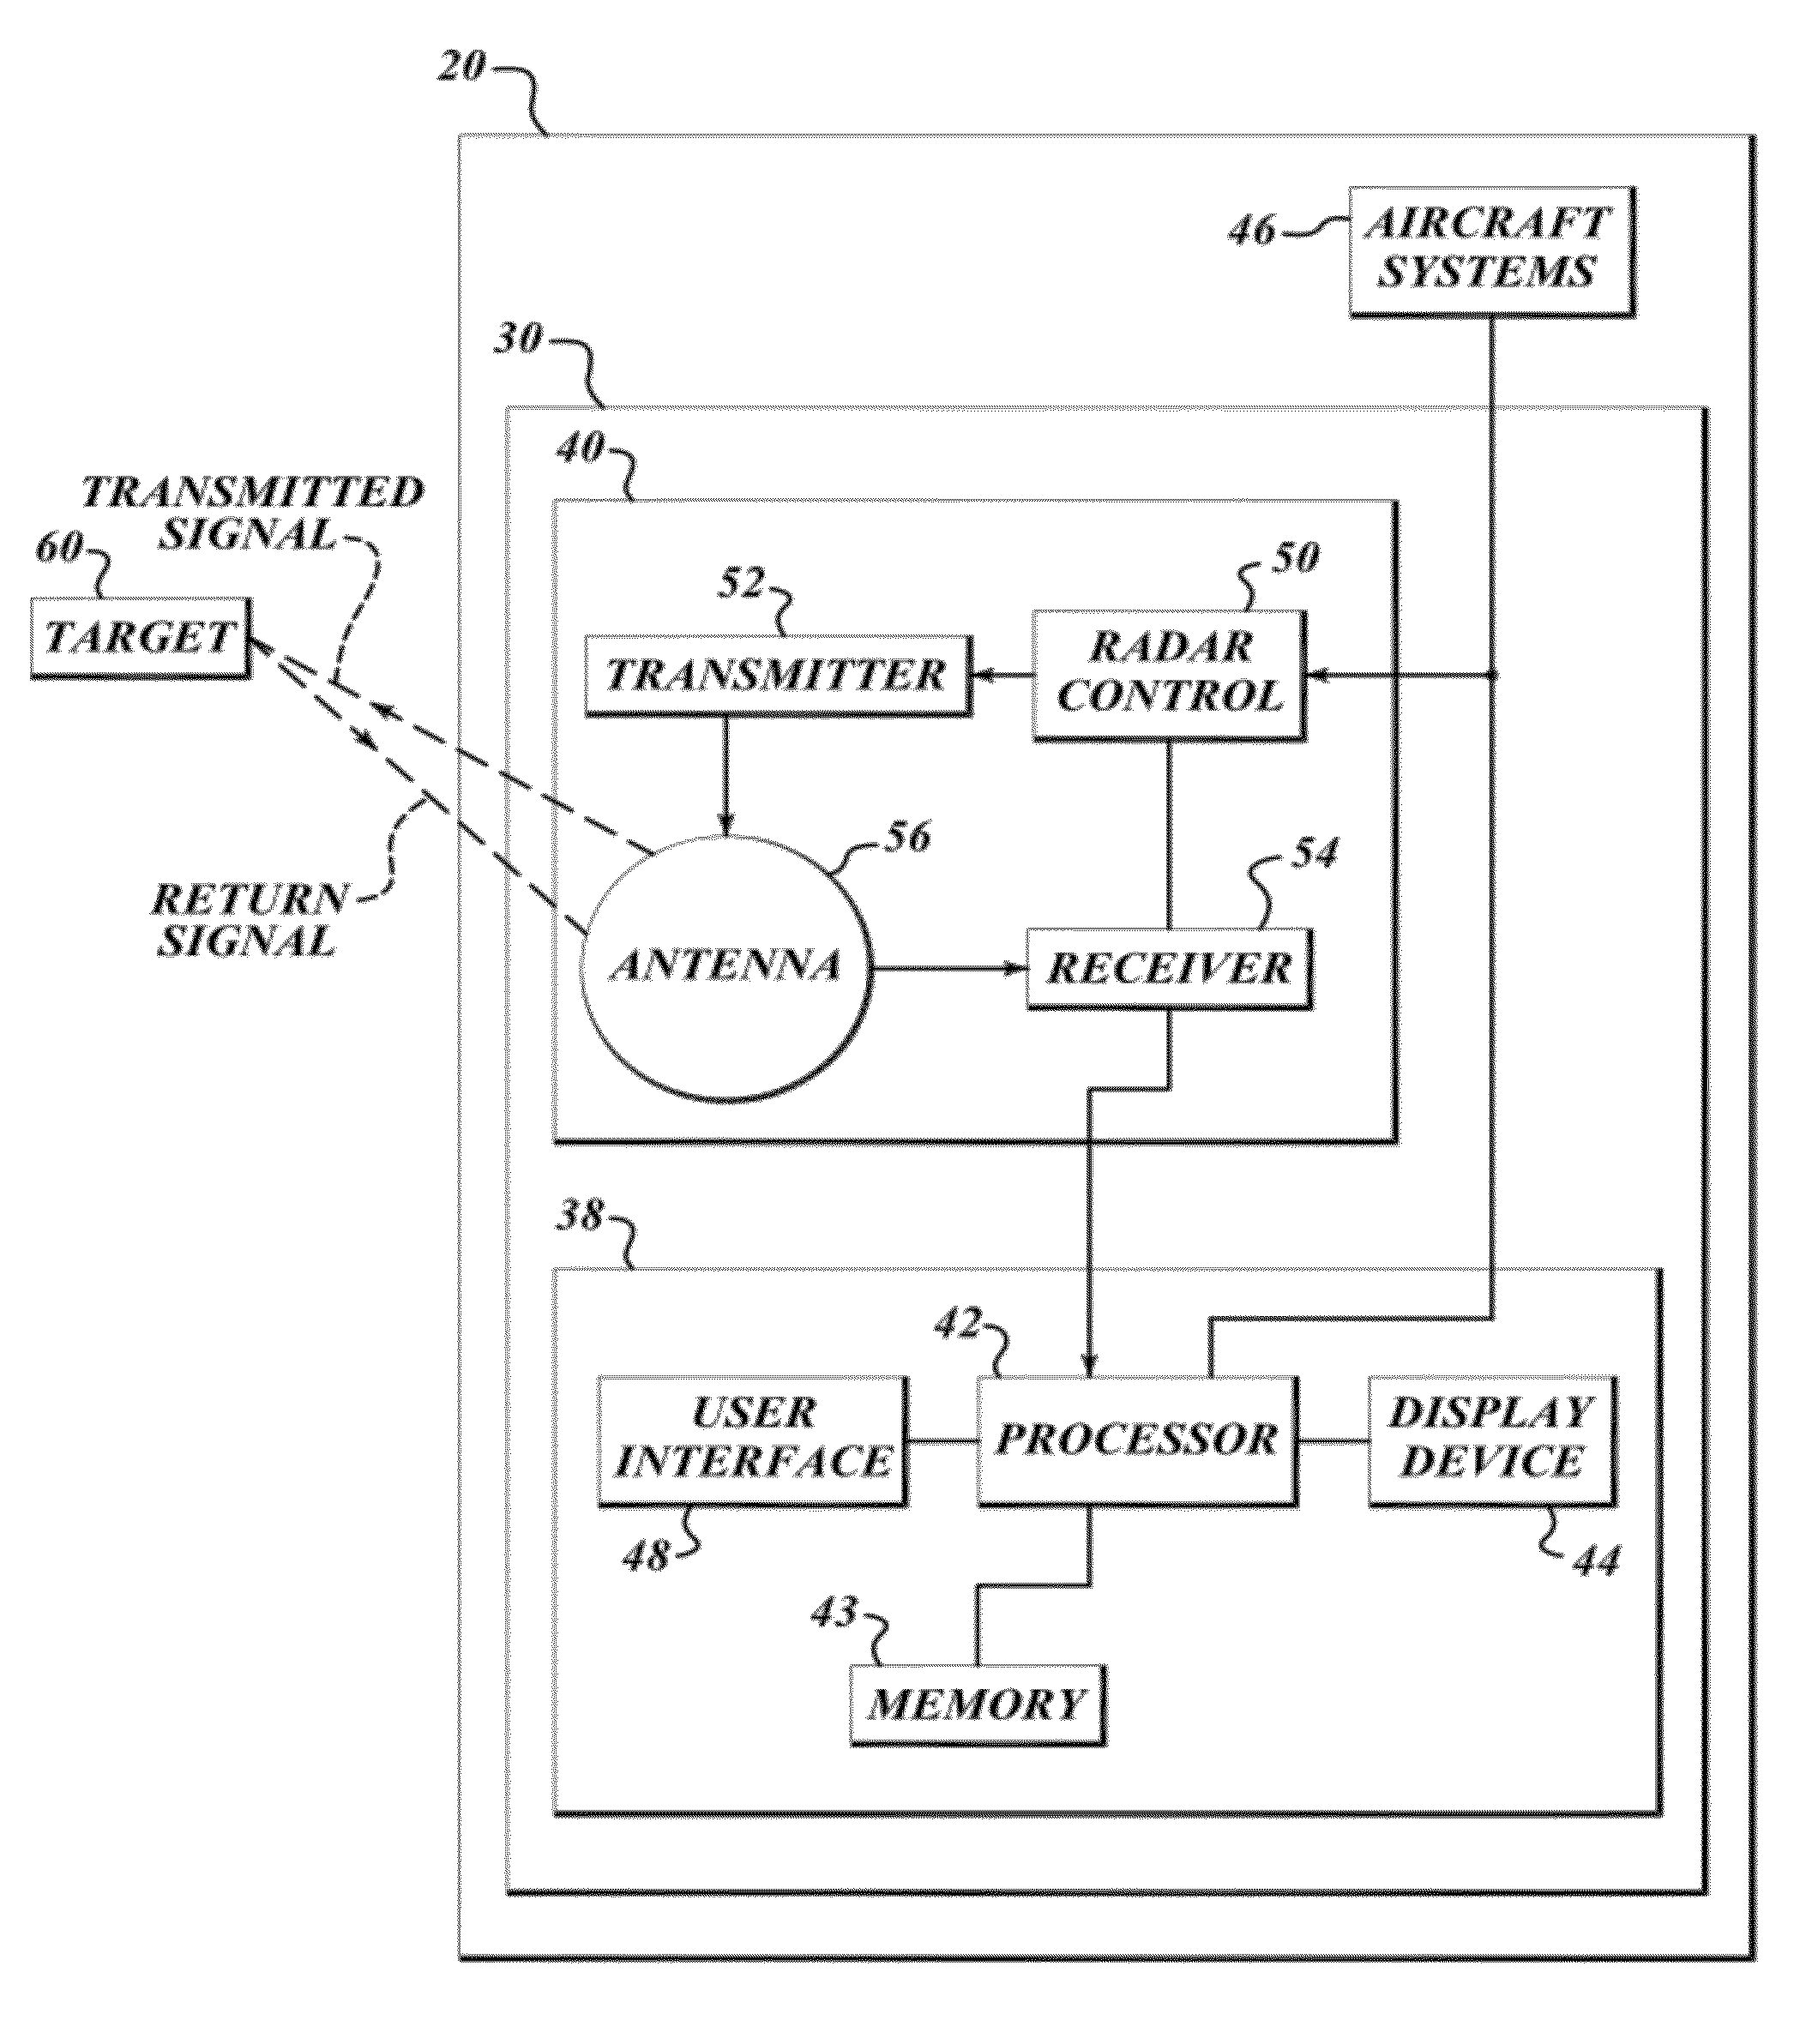 Methods and systems for identifying hazardous flight zone areas on a display